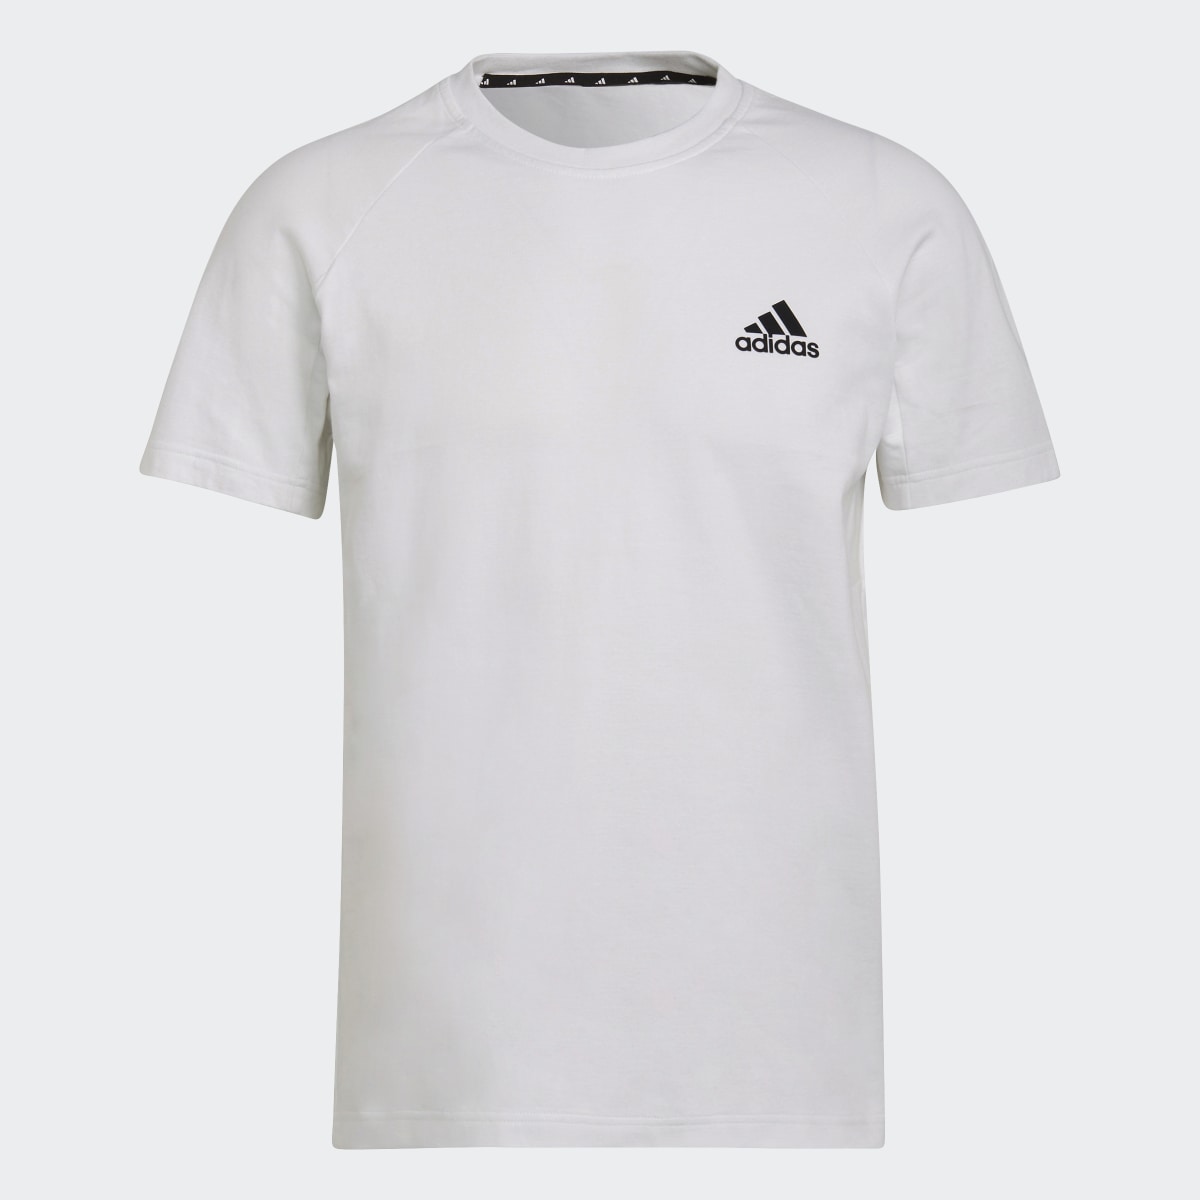 Adidas Designed For Gameday Tee. 5